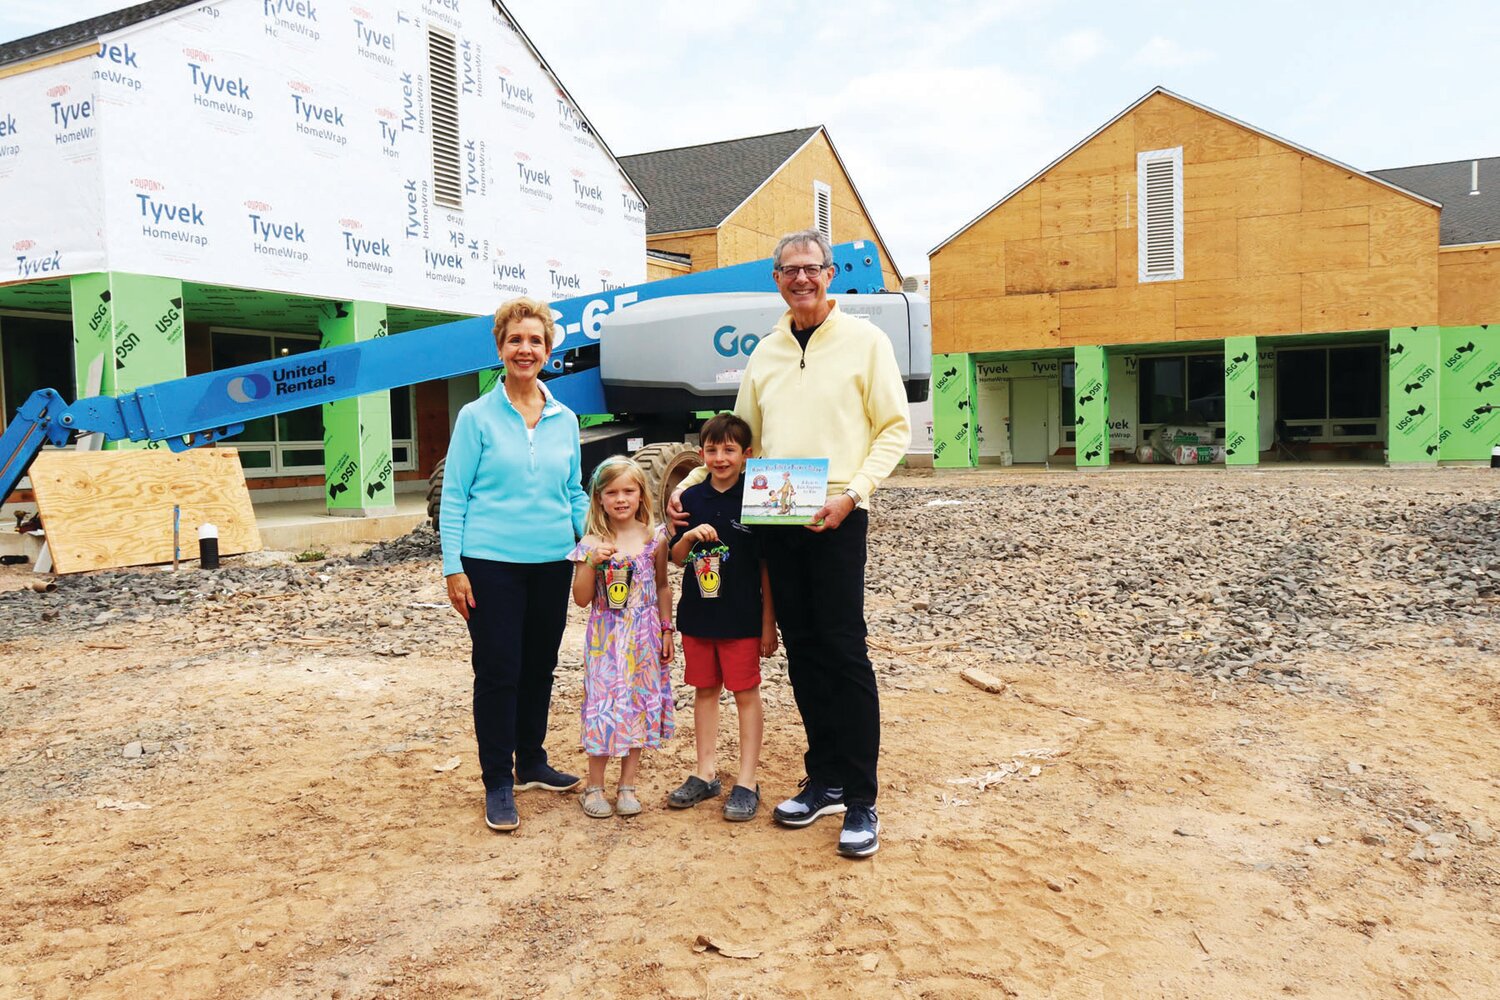 Jeanne and John Hubbard are joined by friends as they visit the site of the new Children’s Village facility on the Doylestown Hospital campus.